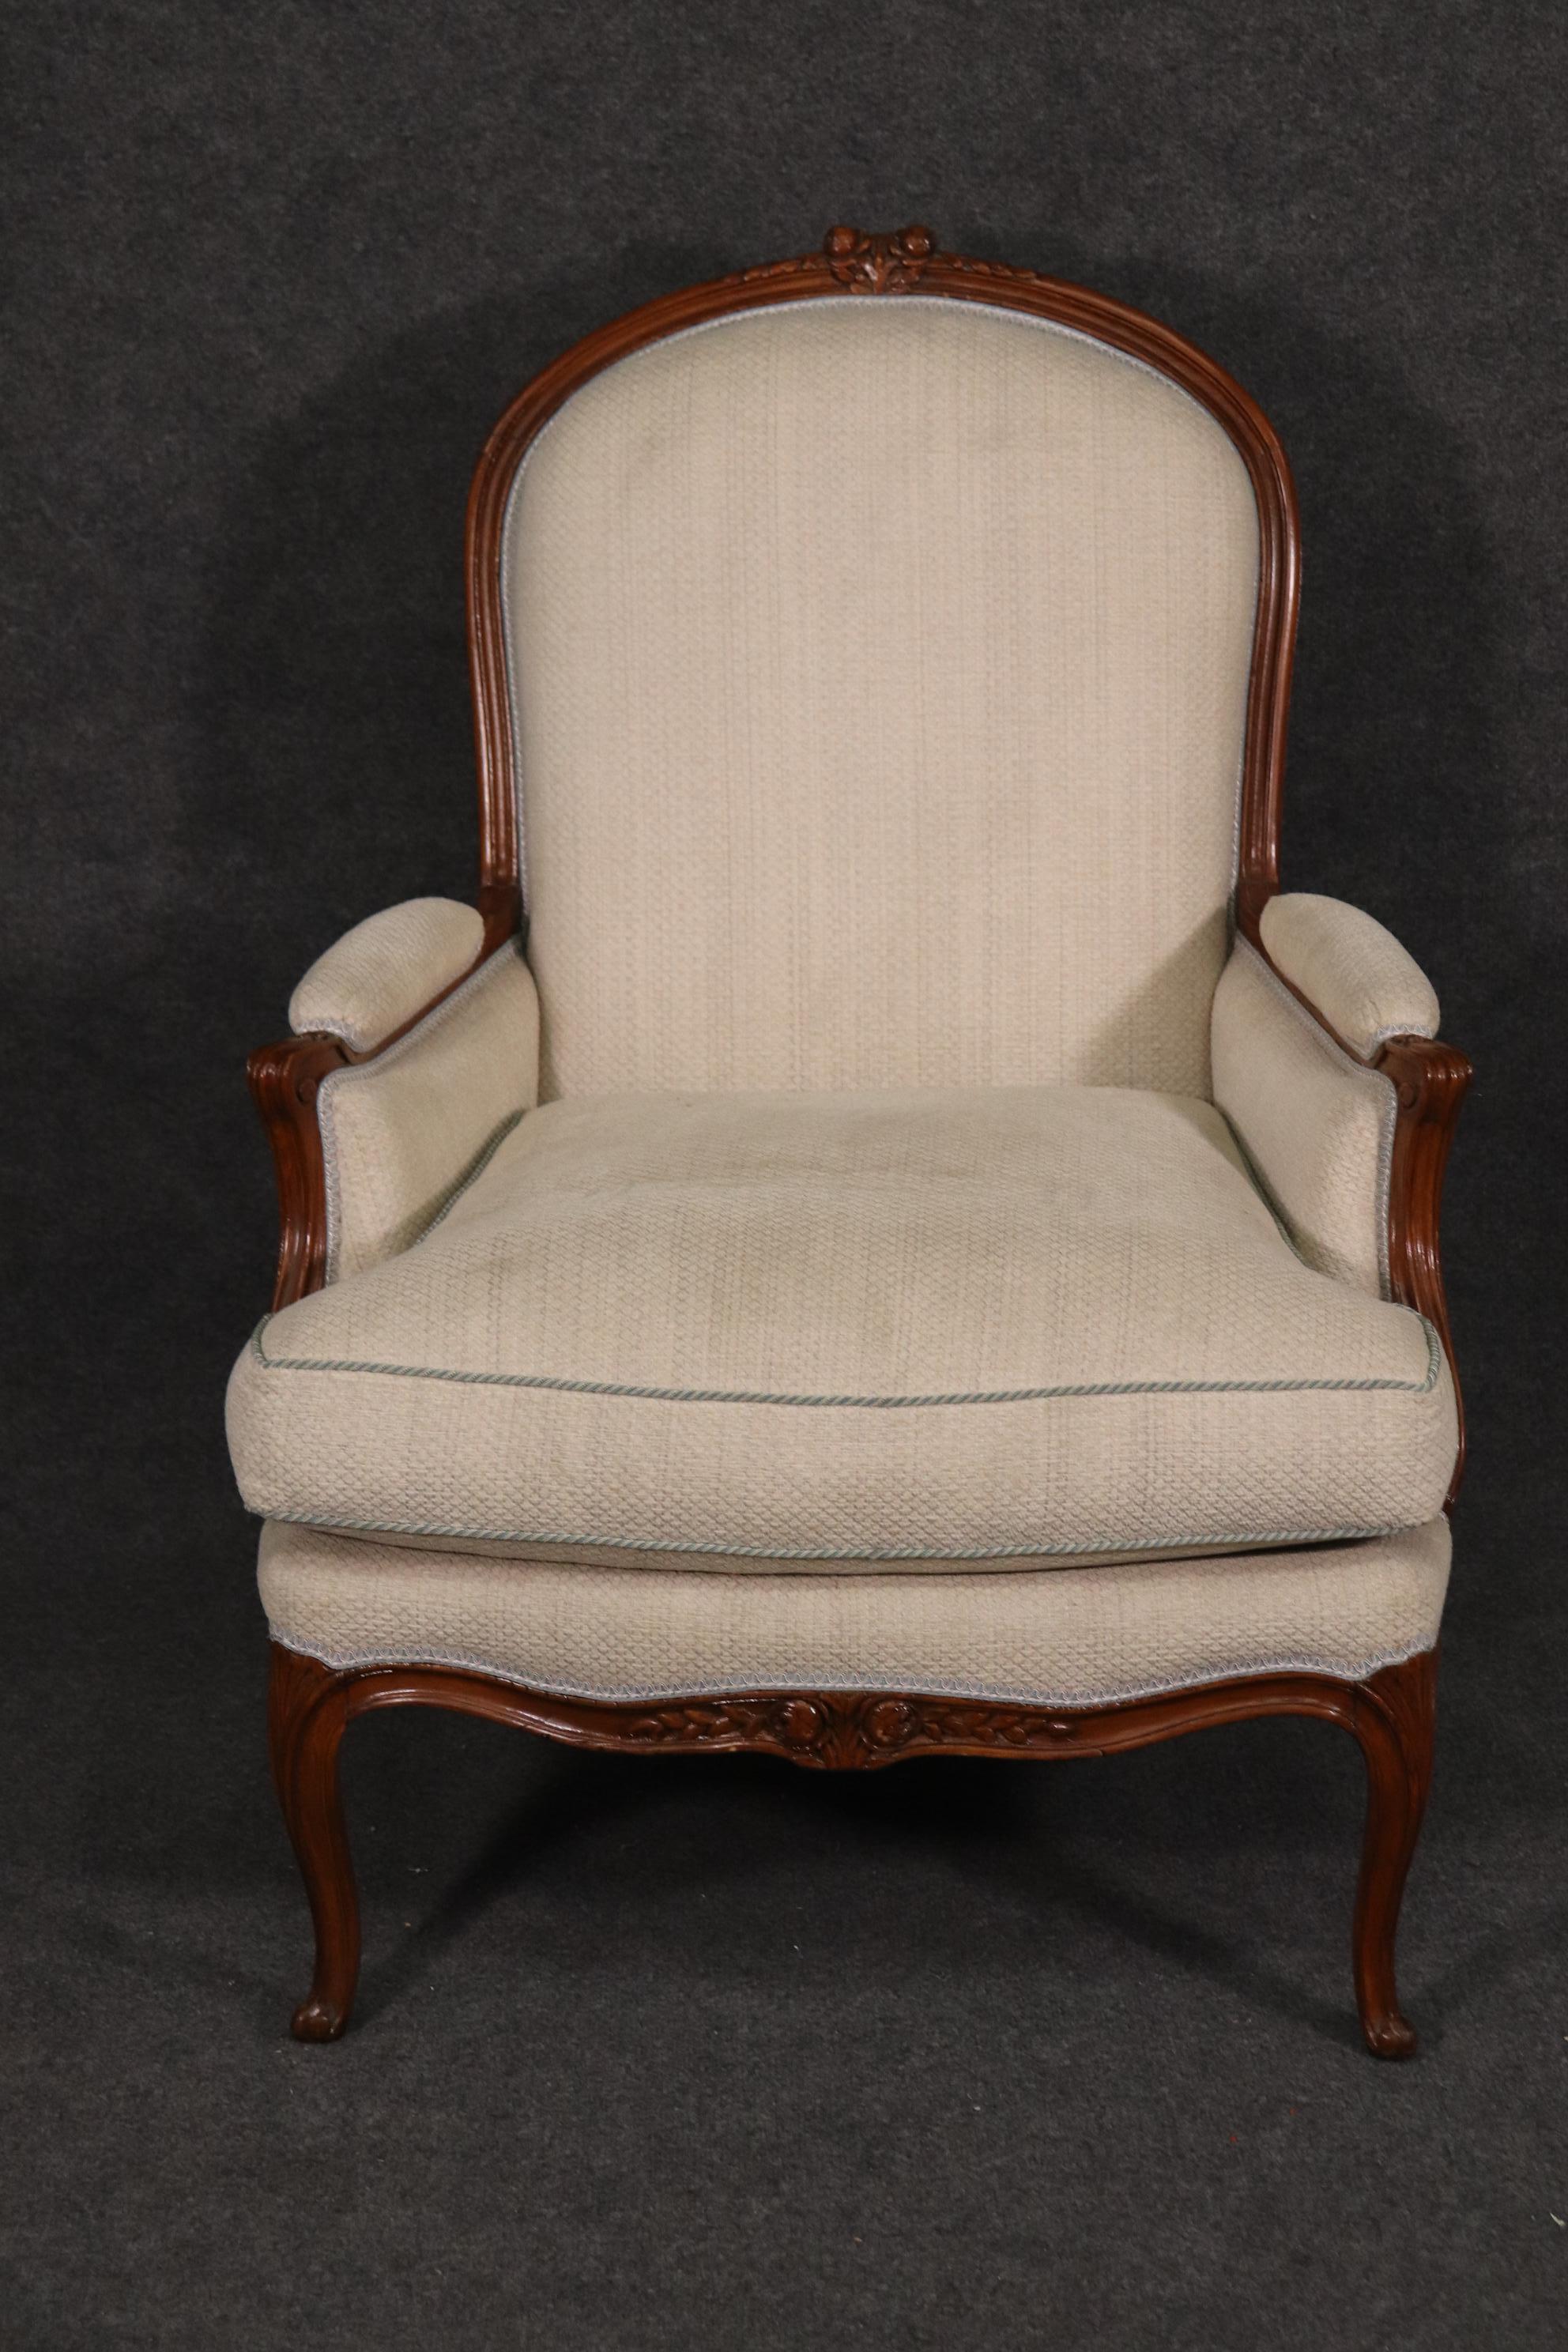 This is a superb carved French bergere chair. The chair is in good condition and will show signs of wear and use. The upholstery is used so it's unreasonable to expect perfection but the fabric is still usable. The chairs measure 42 inches tall x 32